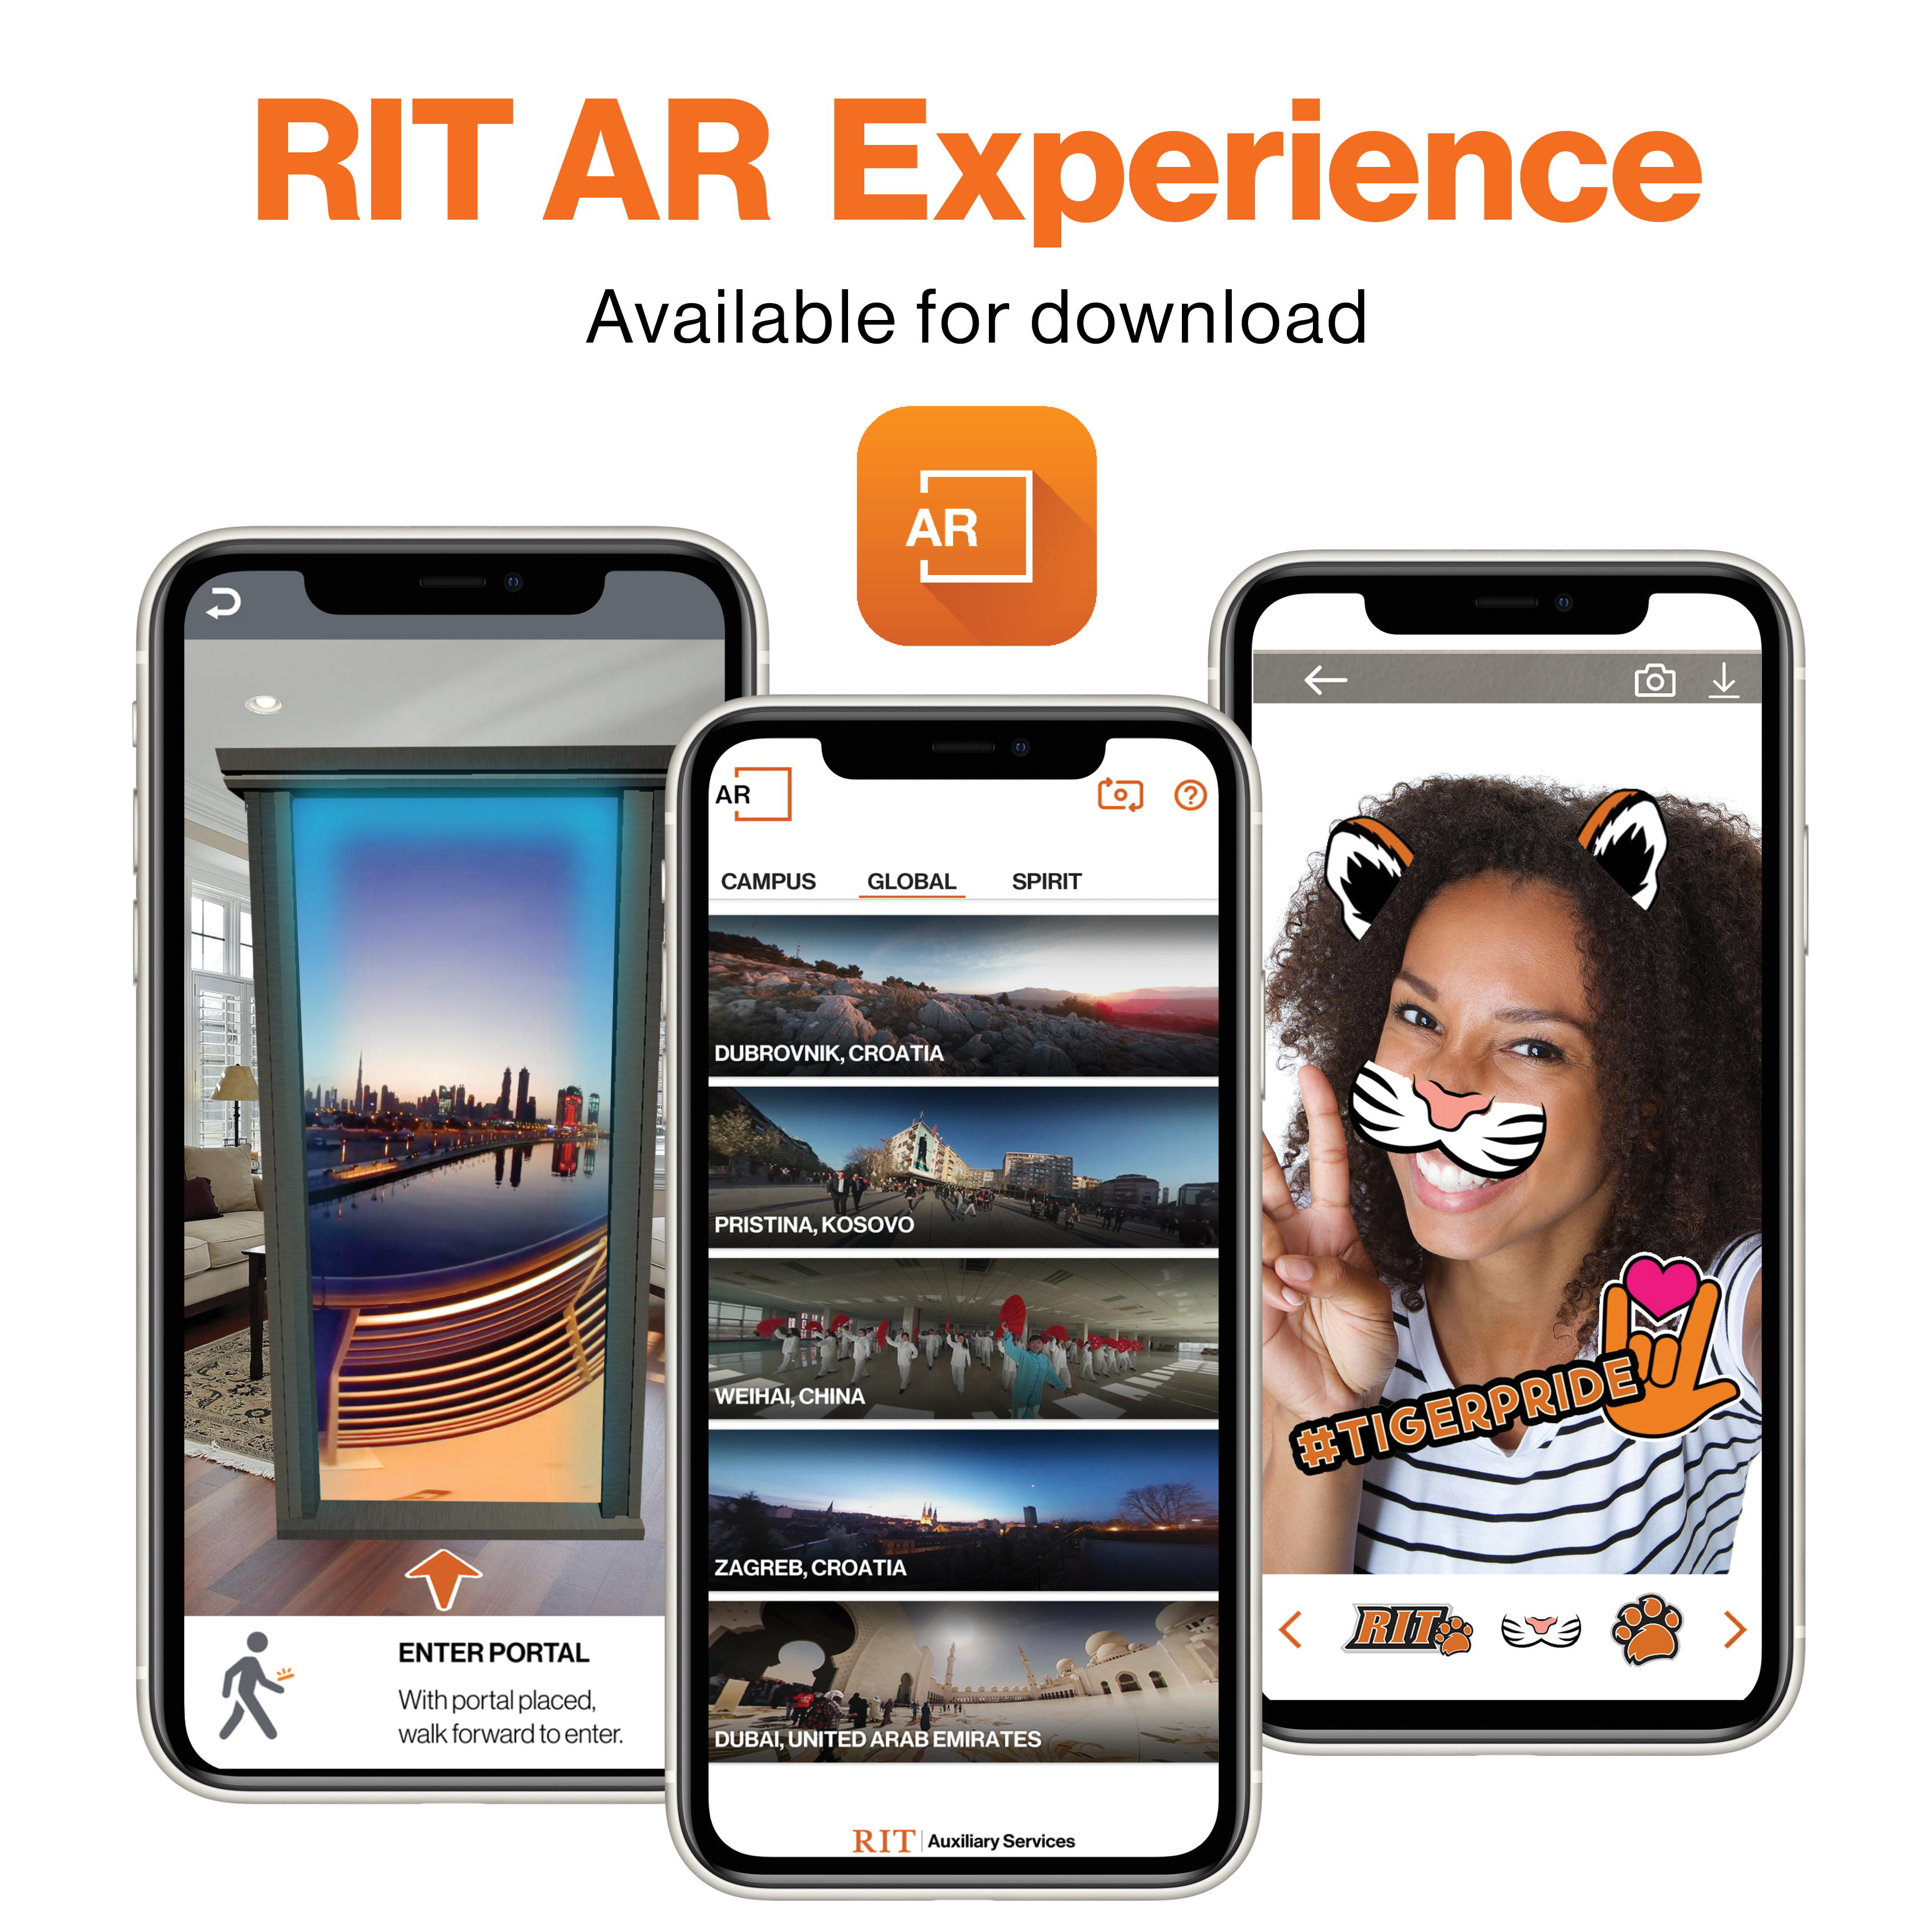 Three cell phone screens with images from the RIT AR Experience App